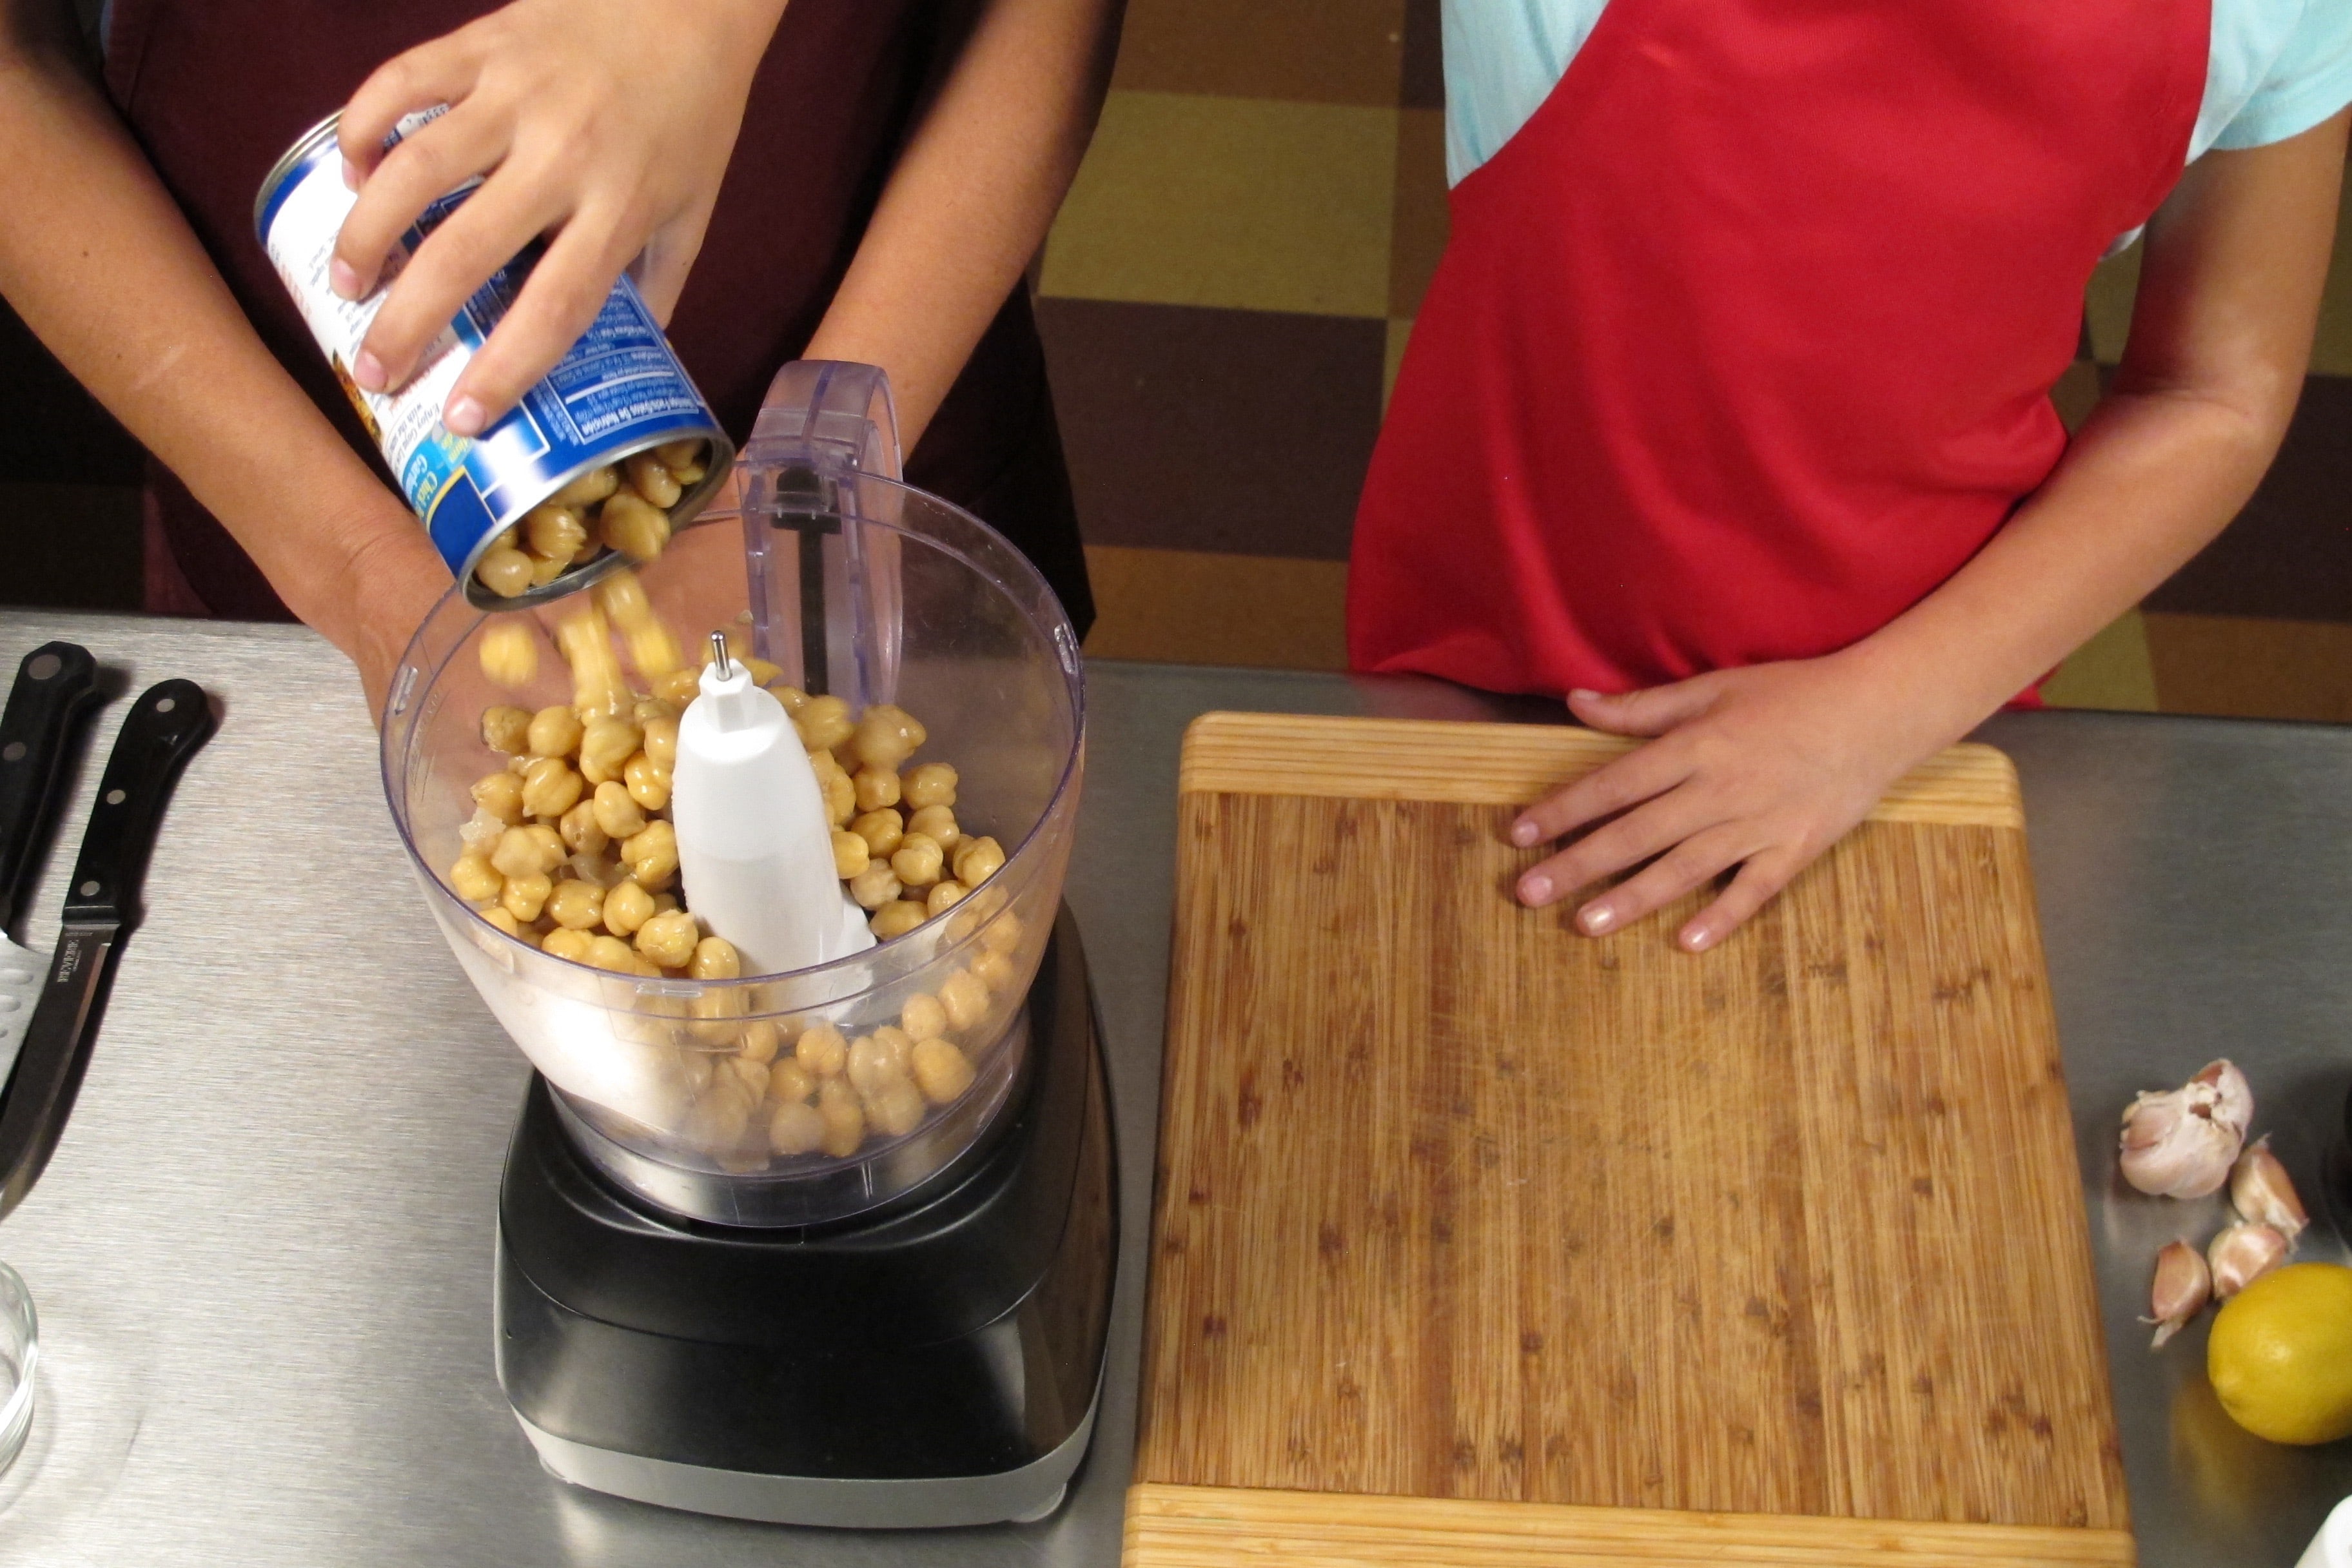 Place garbanzo beans into electric blender or food processor.